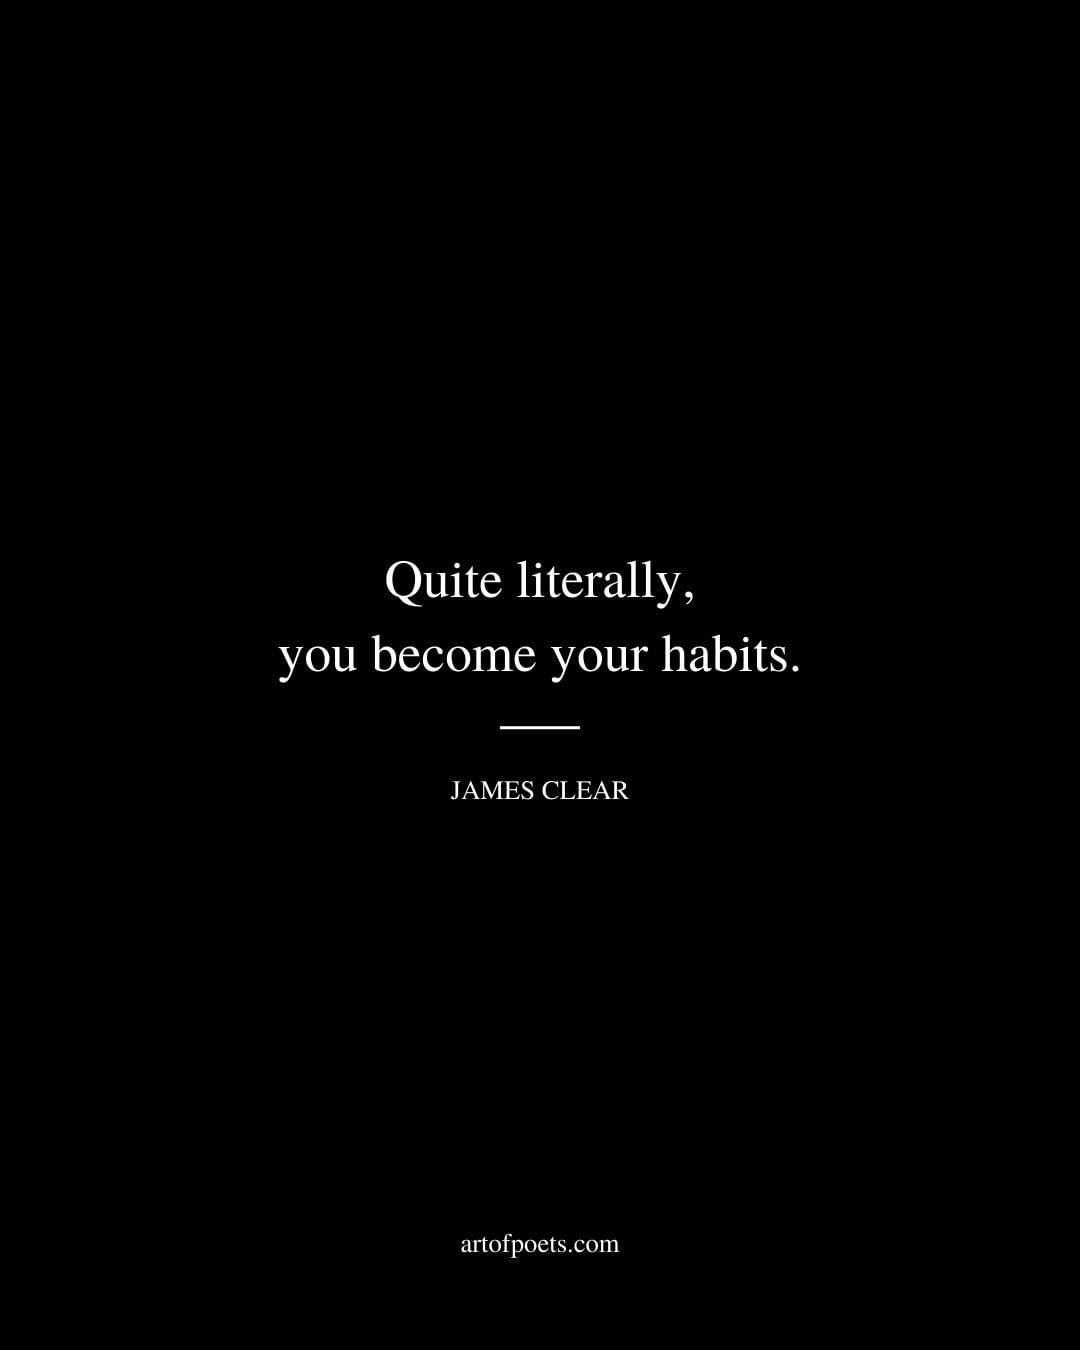 Quite literally you become your habits